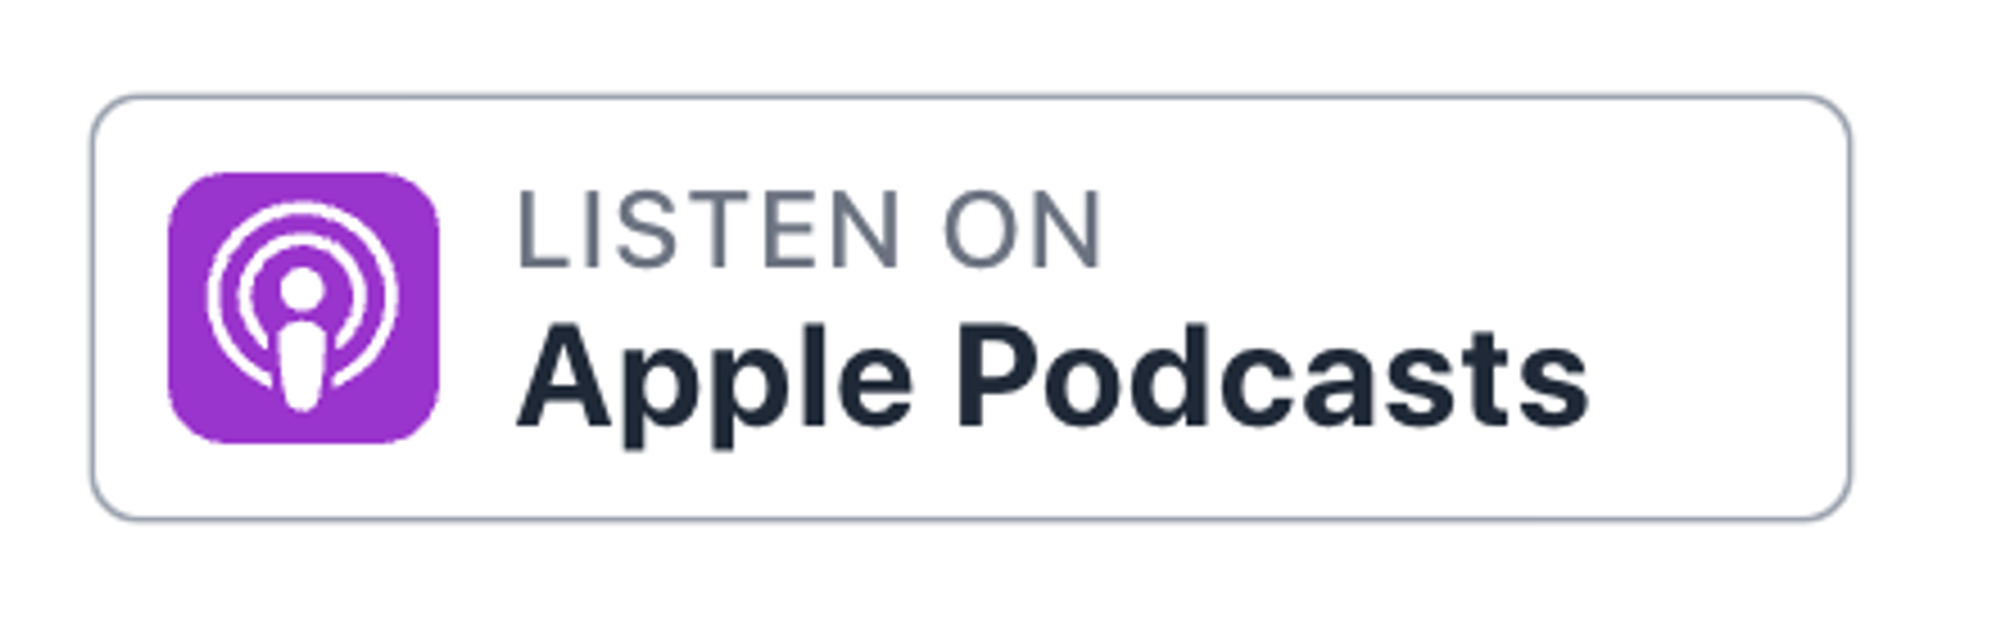 https://podcasts.apple.com/us/podcast/product-journey/id1477619025